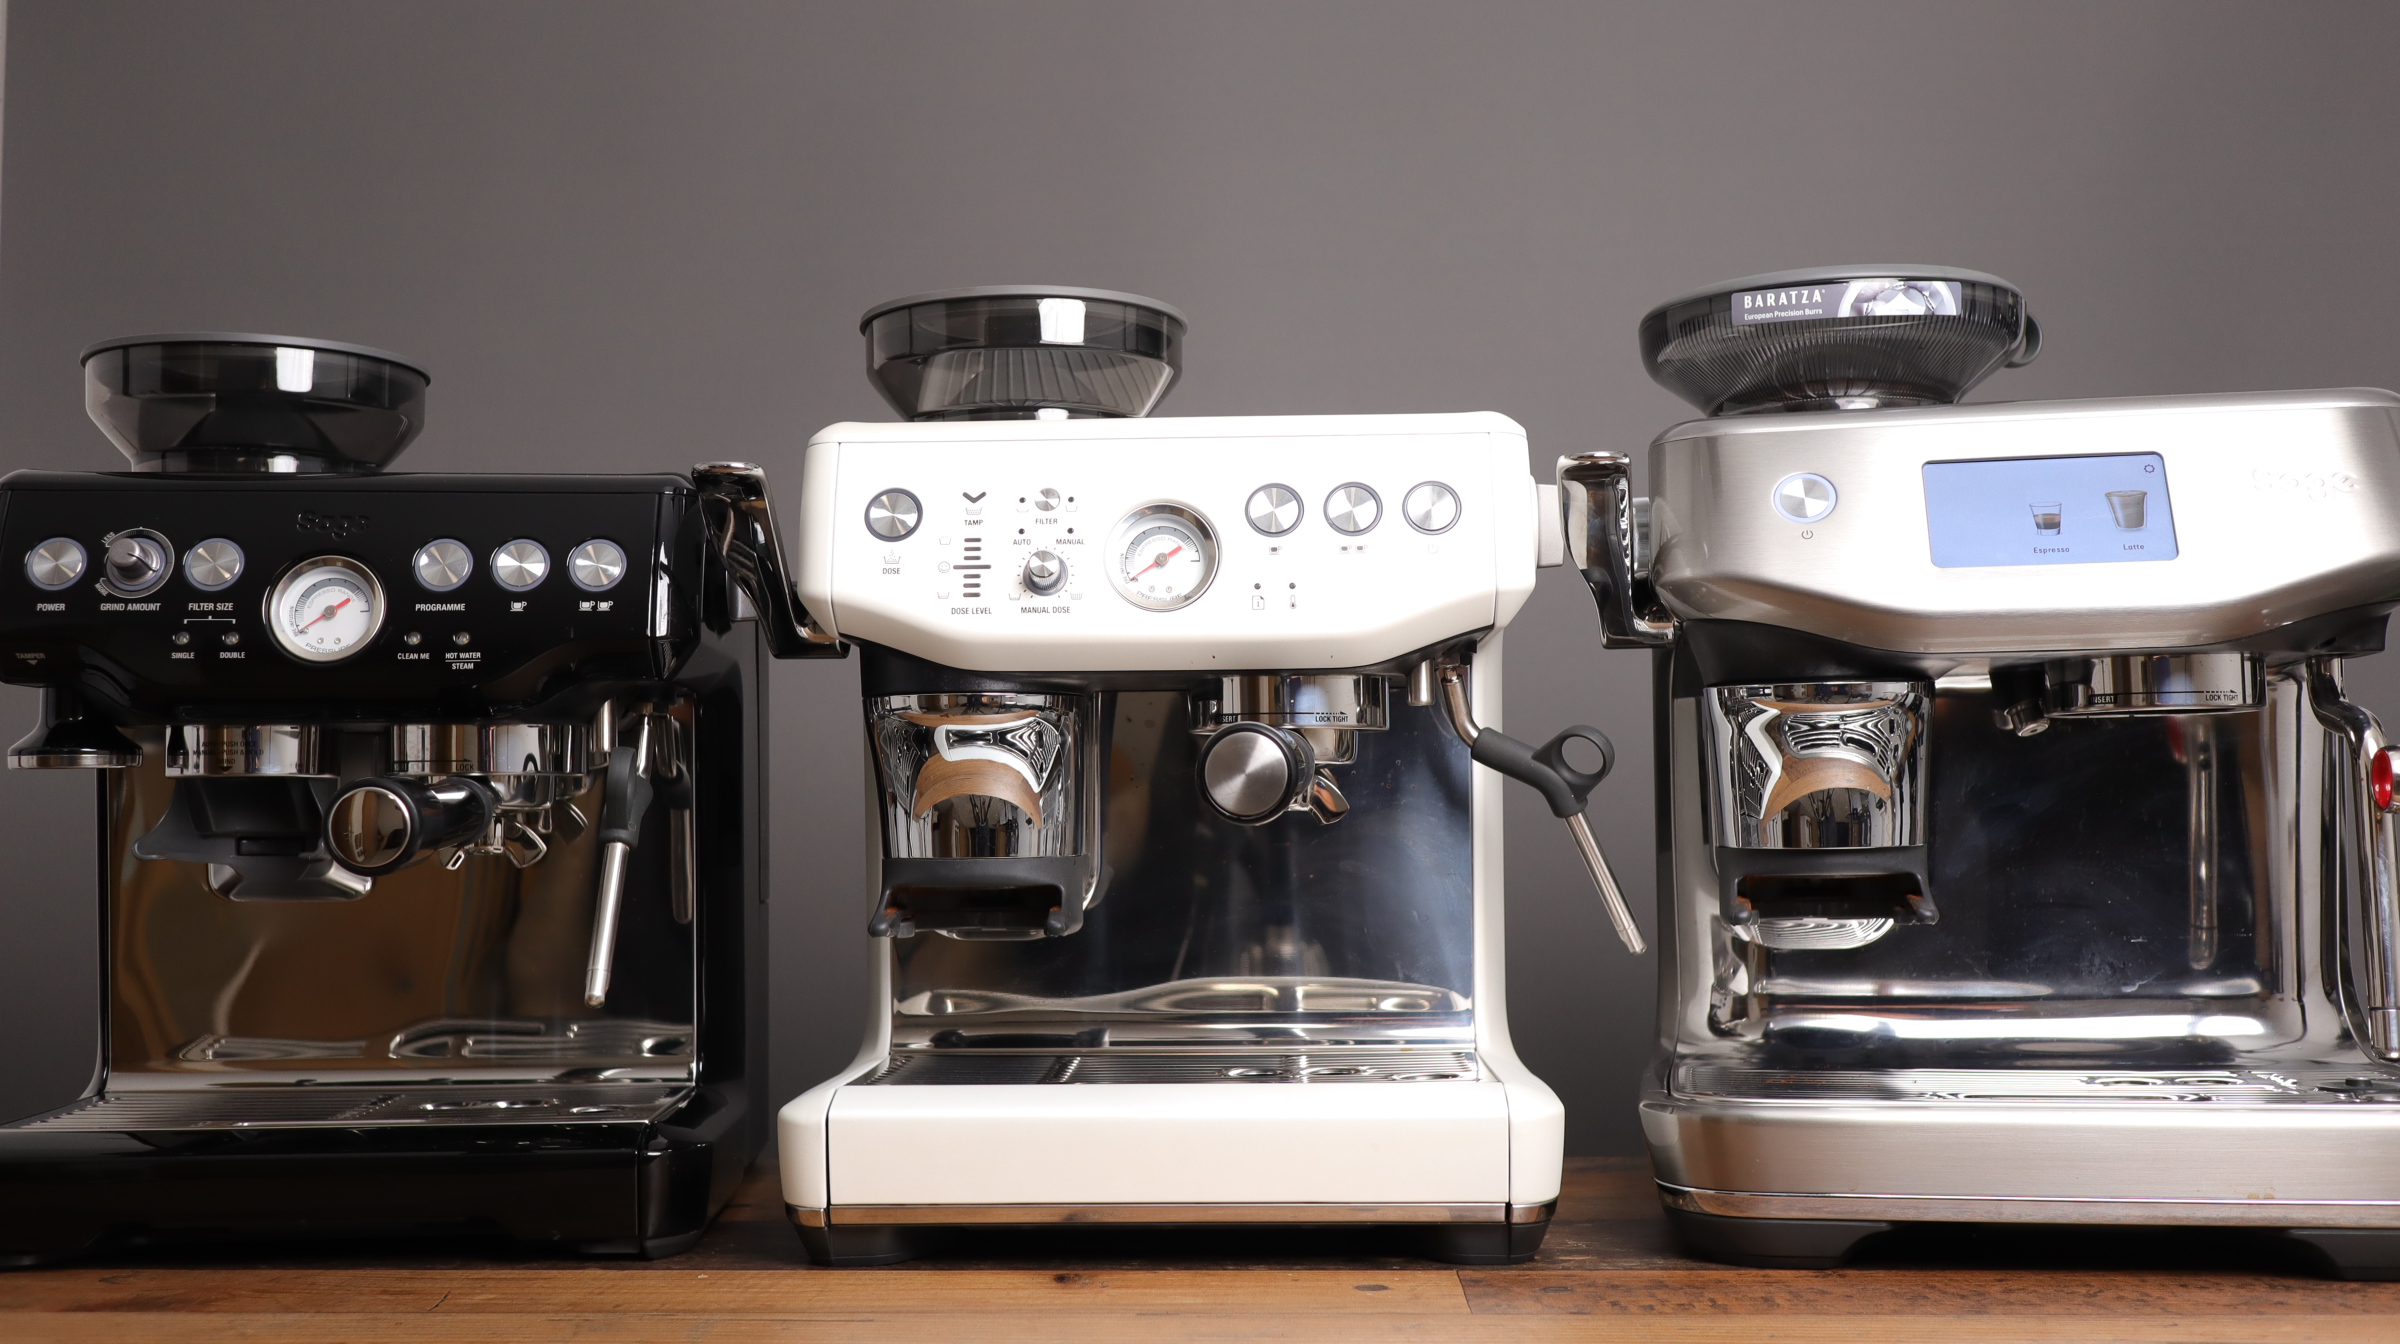 In this picture you can see the Breville Barista Express vs Impress vs Touch